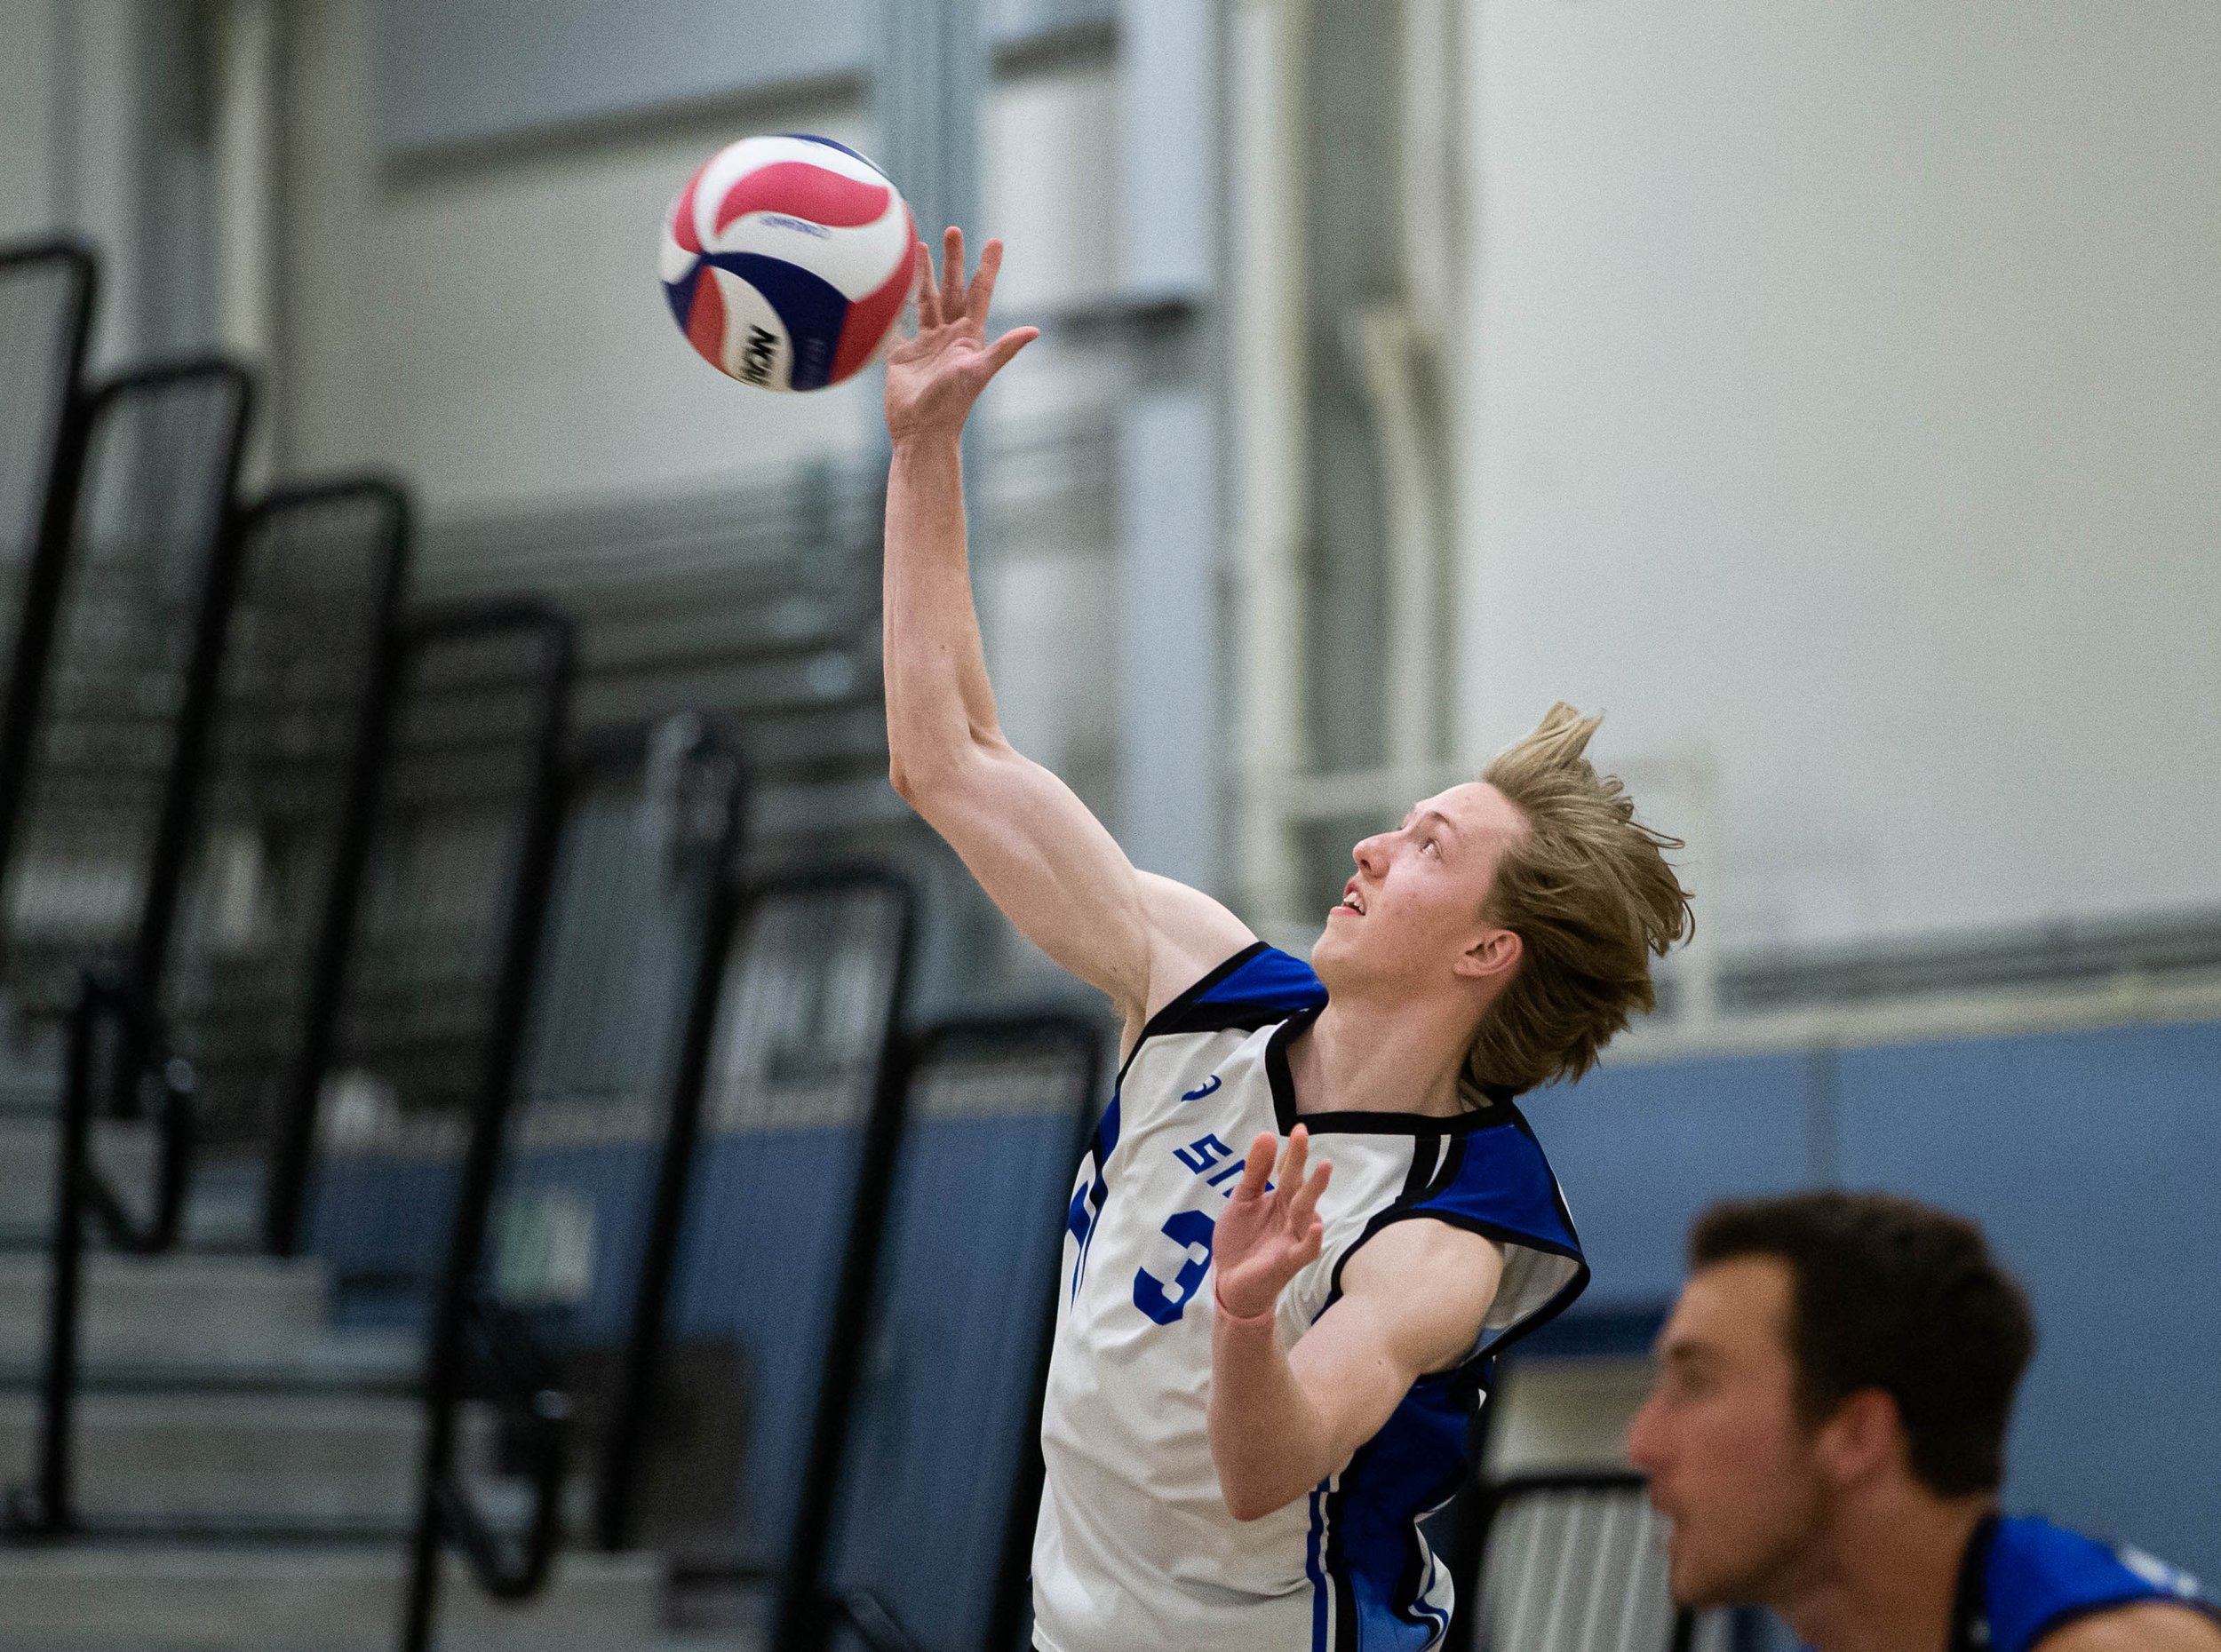  Camden Higbee(3) from Santa monica College serving the ball to beging the play against the Santa Barbara Vaqueros on Fri. March 24 in the Corsair Gym at Santa Monica, Calif. (Danilo Perez | The Corsair) 